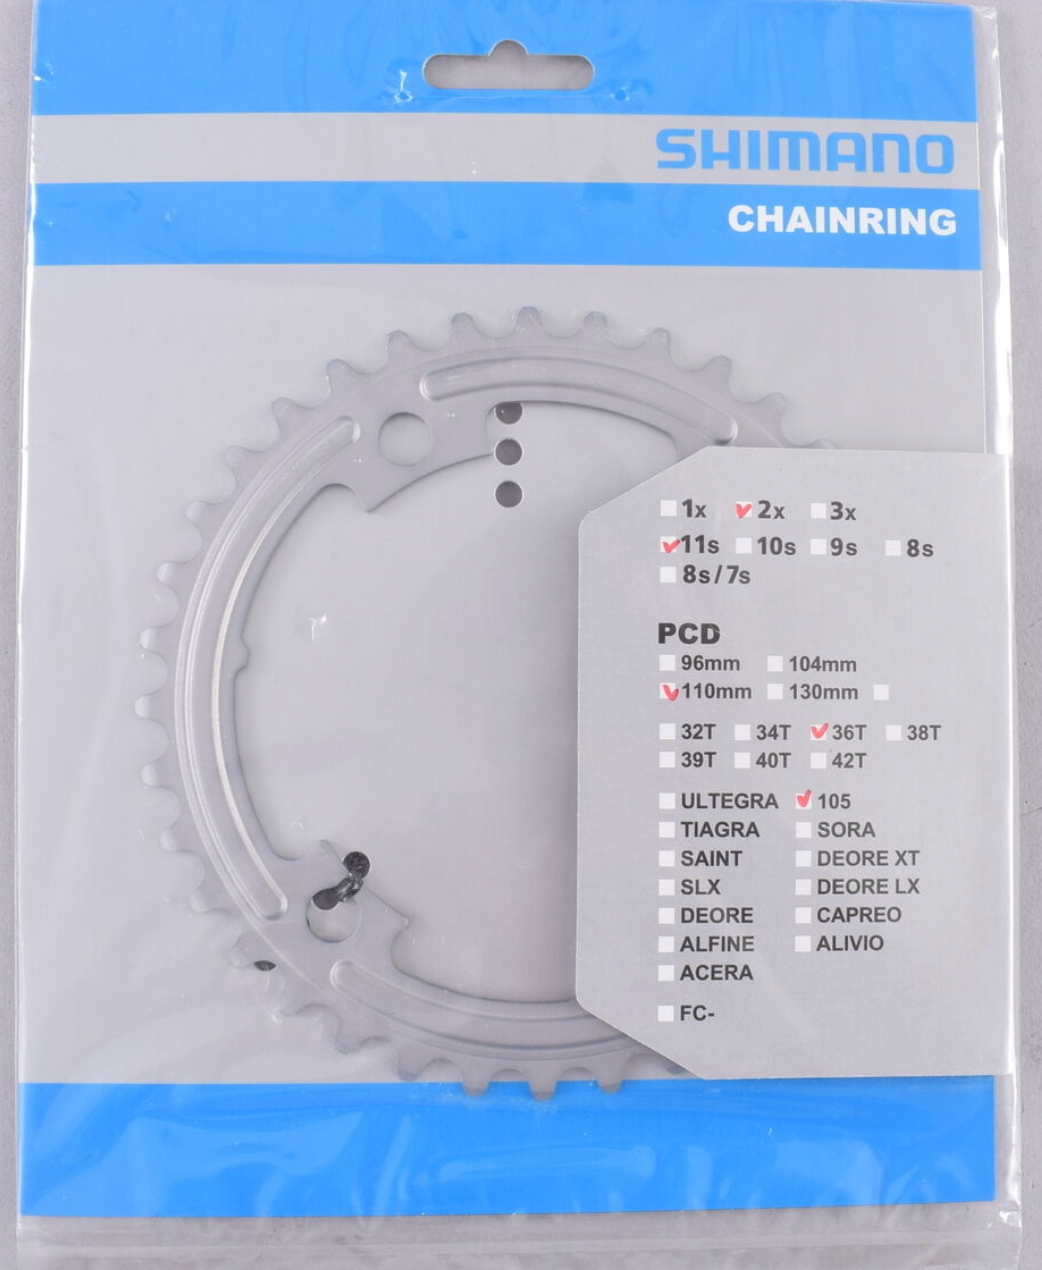 SHIMANO - FC-5800S CHAINRING, 2x11 SP, 110mm